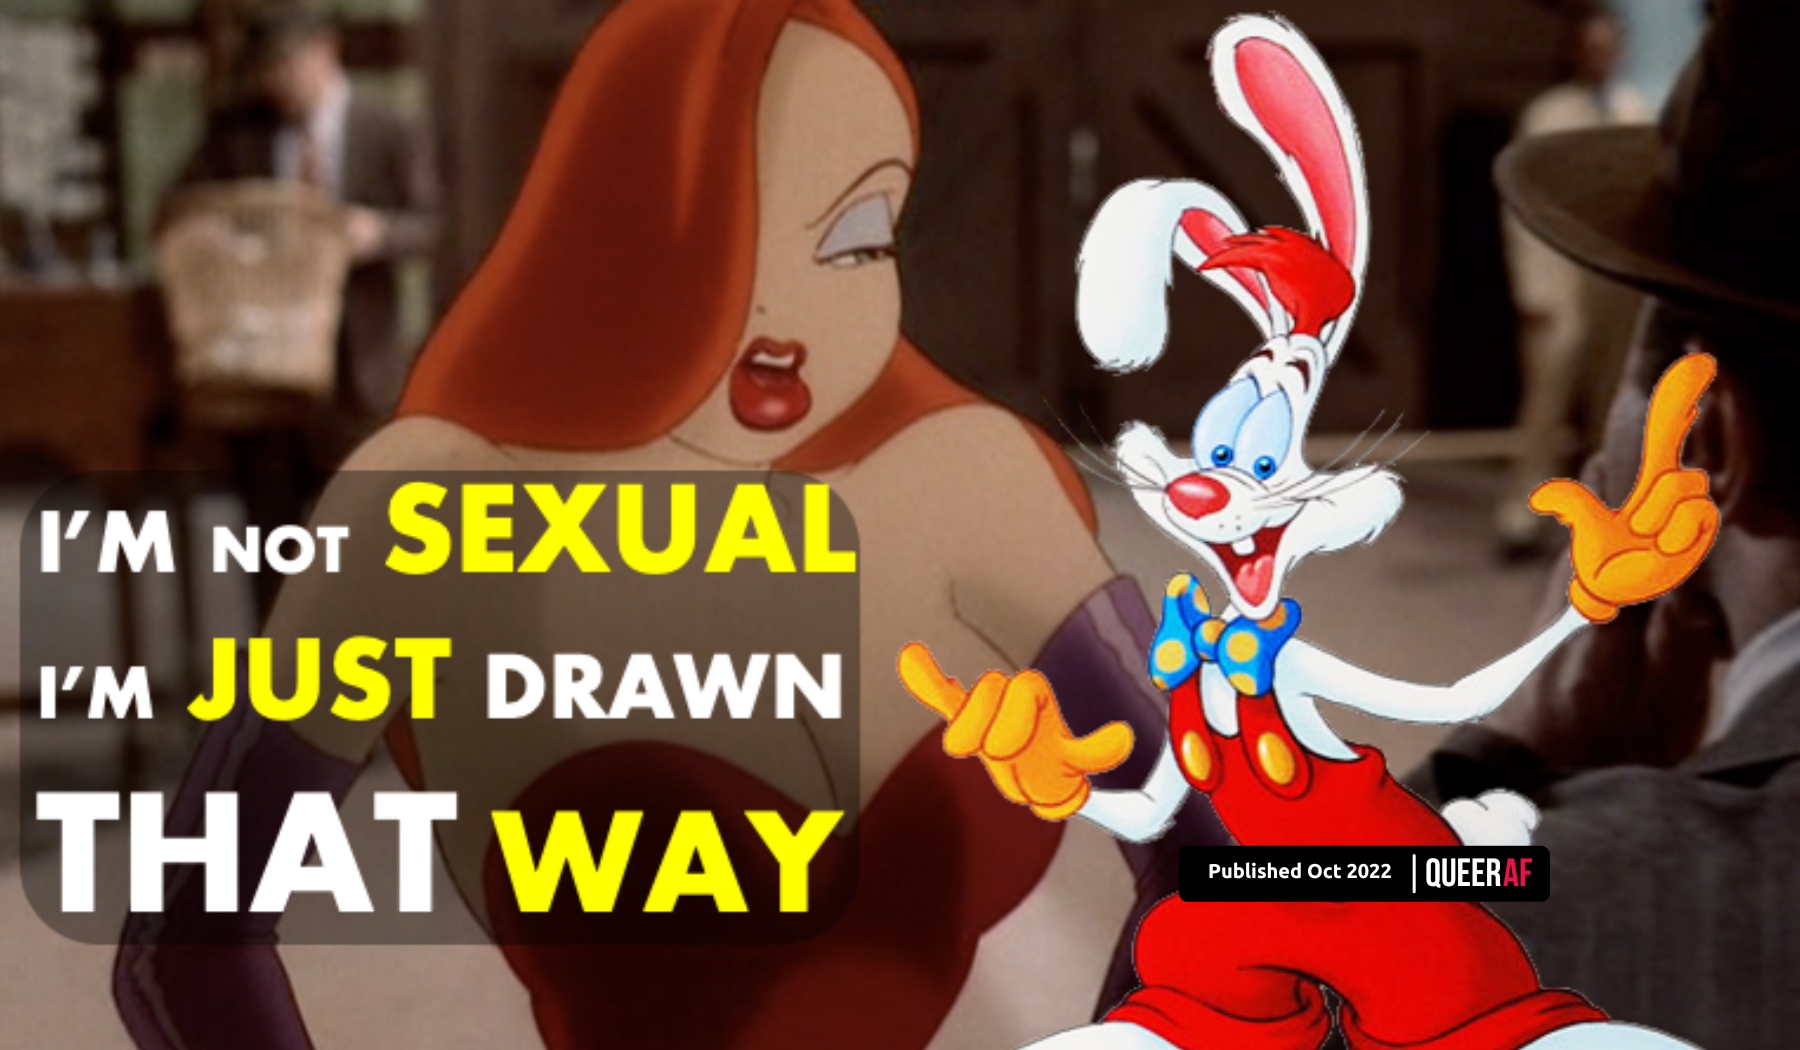 Jessica Rabbit is an asexual icon picture